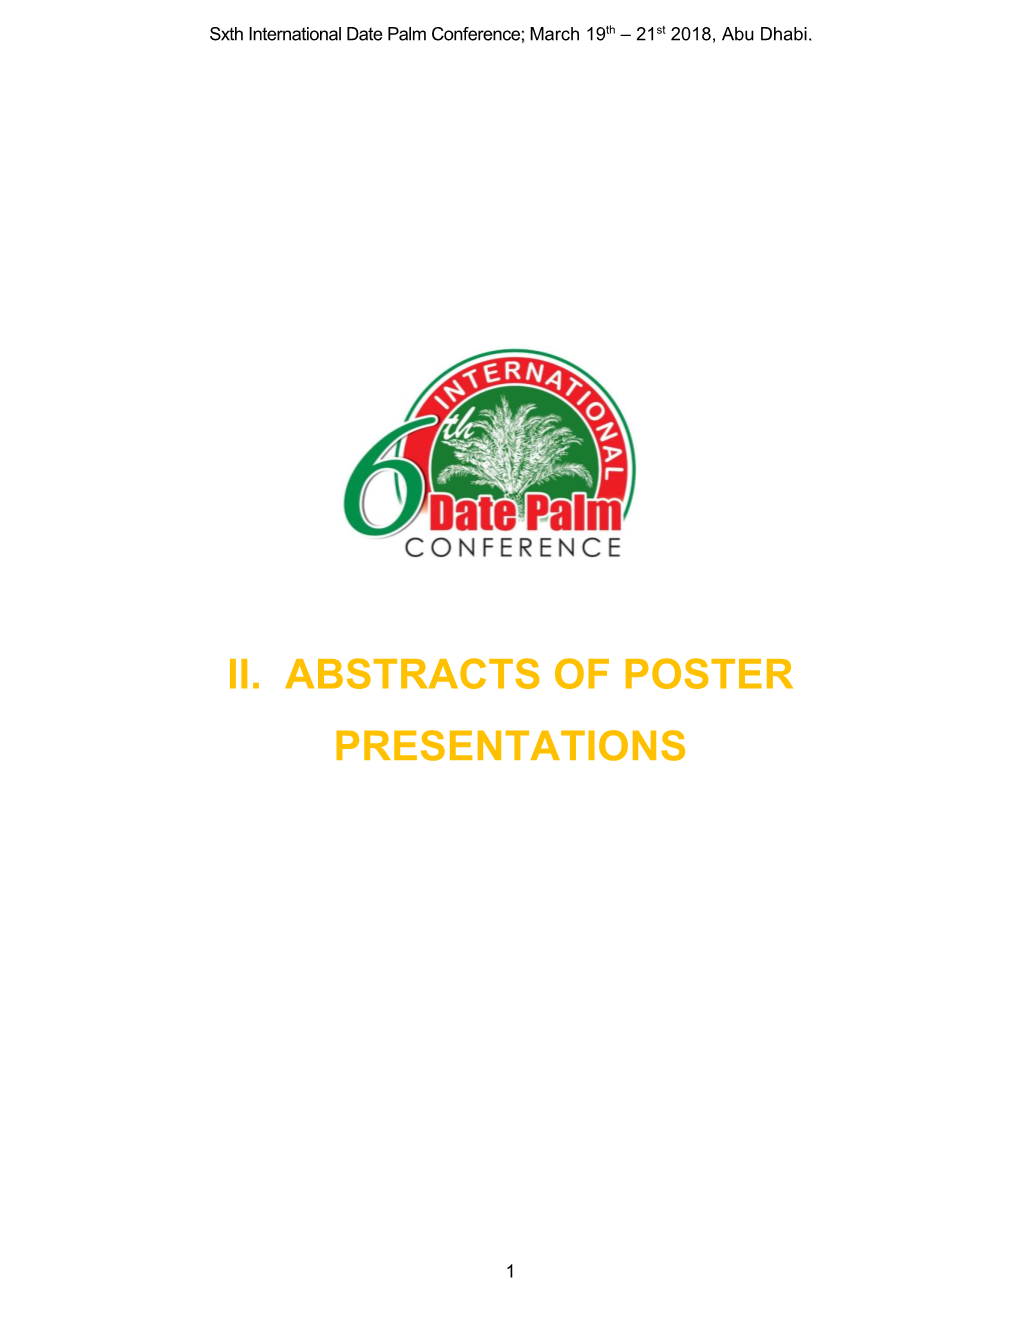 Ii. Abstracts of Poster Presentations